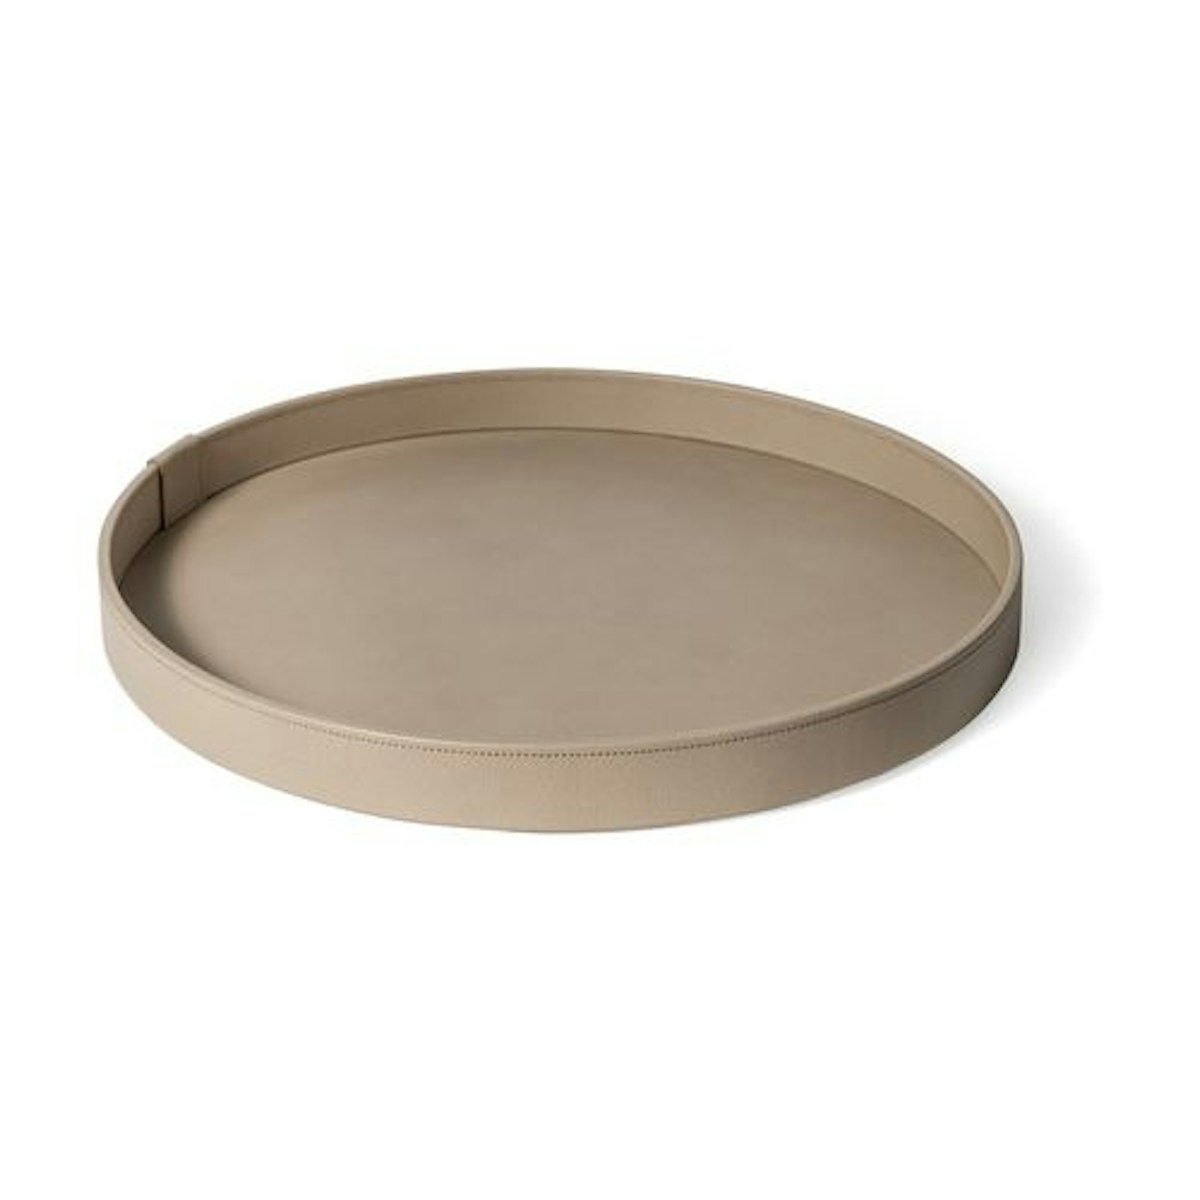 Large Taupe Round Gea Tray - 21 Best Decorative Trays To Buy For Your Tabletop - LuxDeco.com